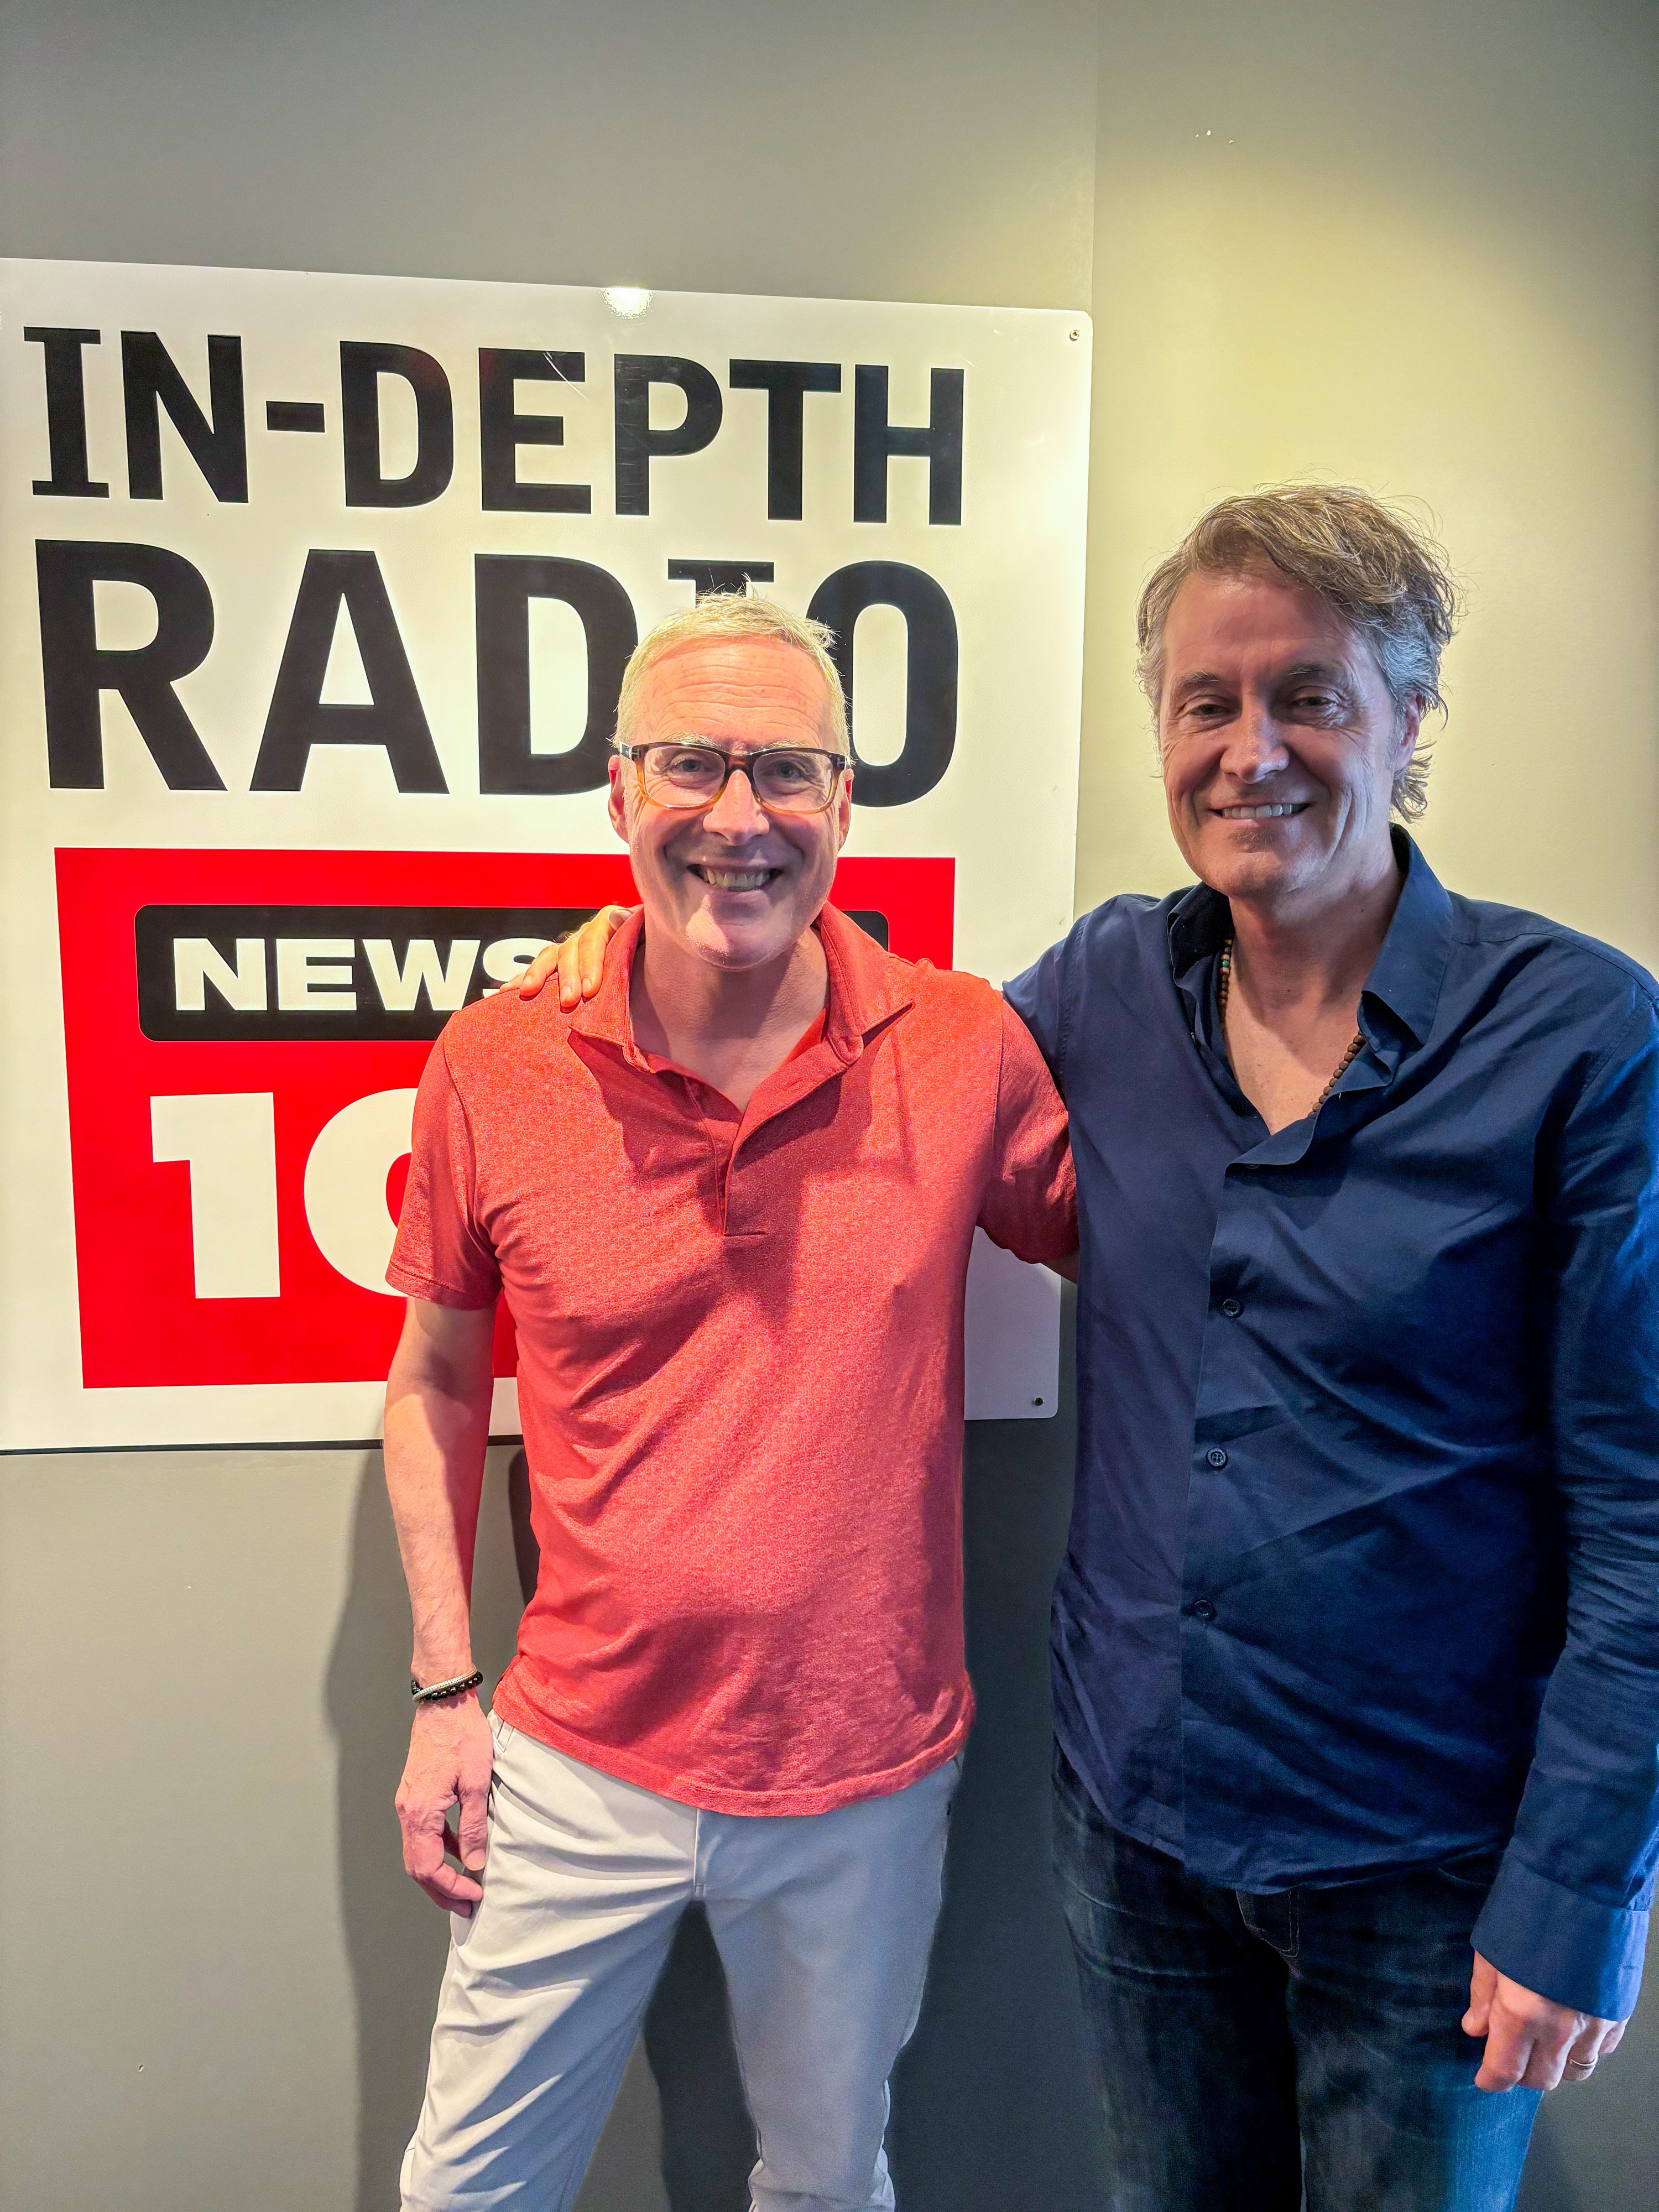 Blue Rodeo’s @JimCuddy sits down with @MooreintheAM ahead of the release of his new album All The World Fades Away.